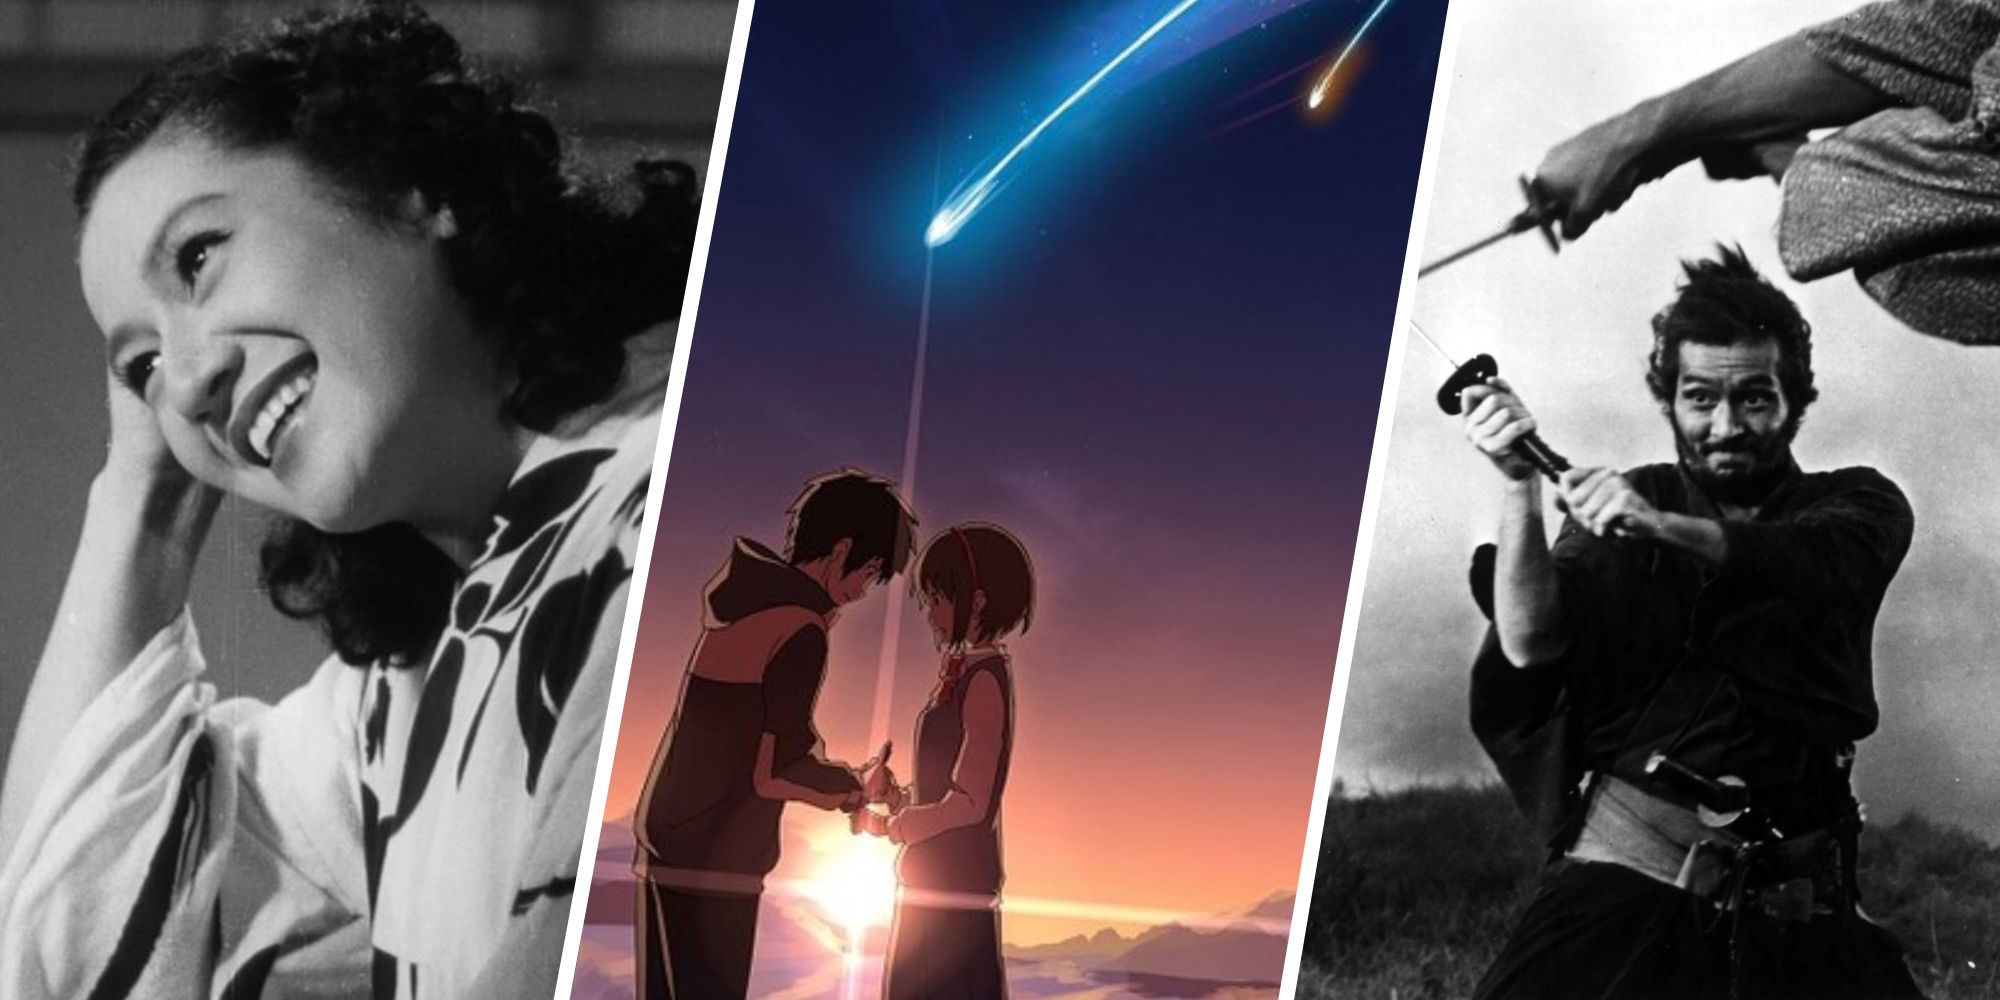 Collage with images from 'Late Spring', 'Your Name', and 'Harakiri'